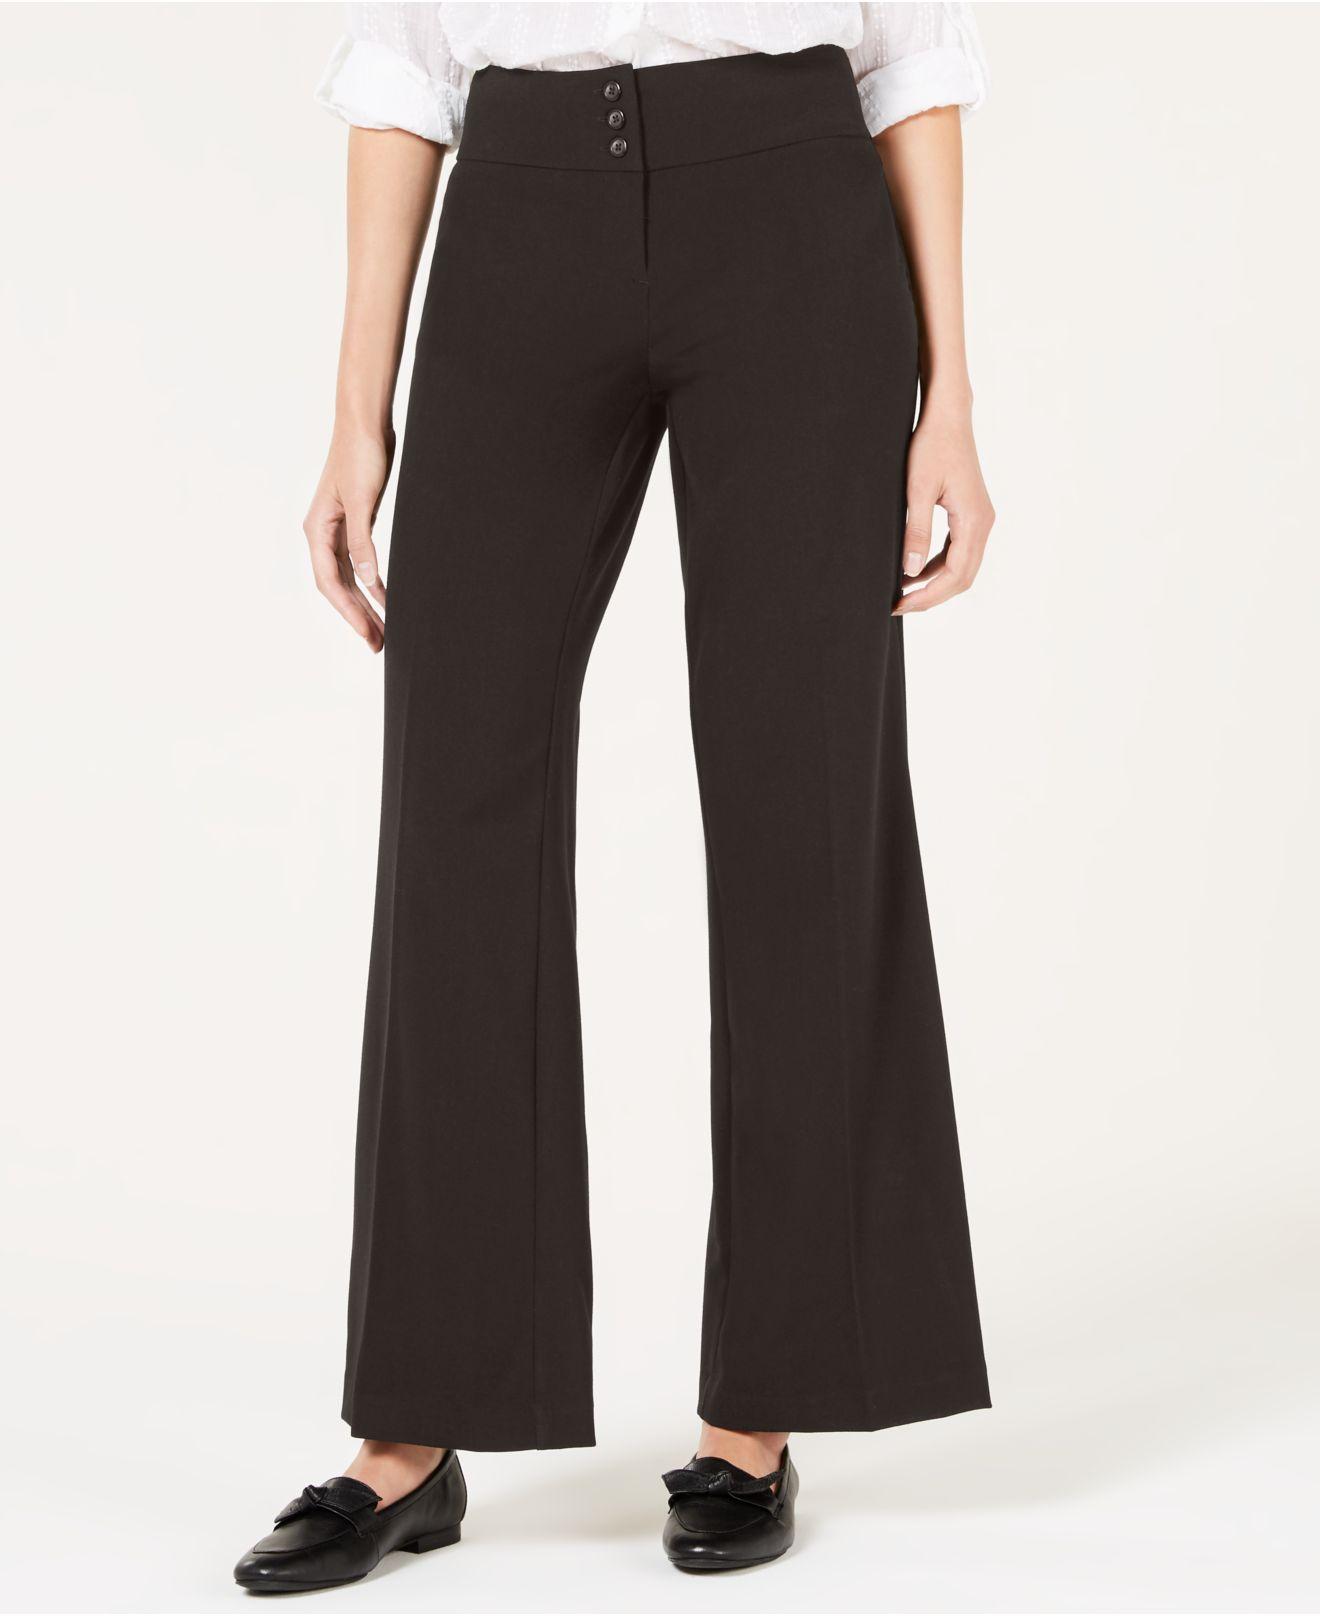 Style & Co. Synthetic Stretch Wide-leg Pants in Deep Black (Black) - Lyst